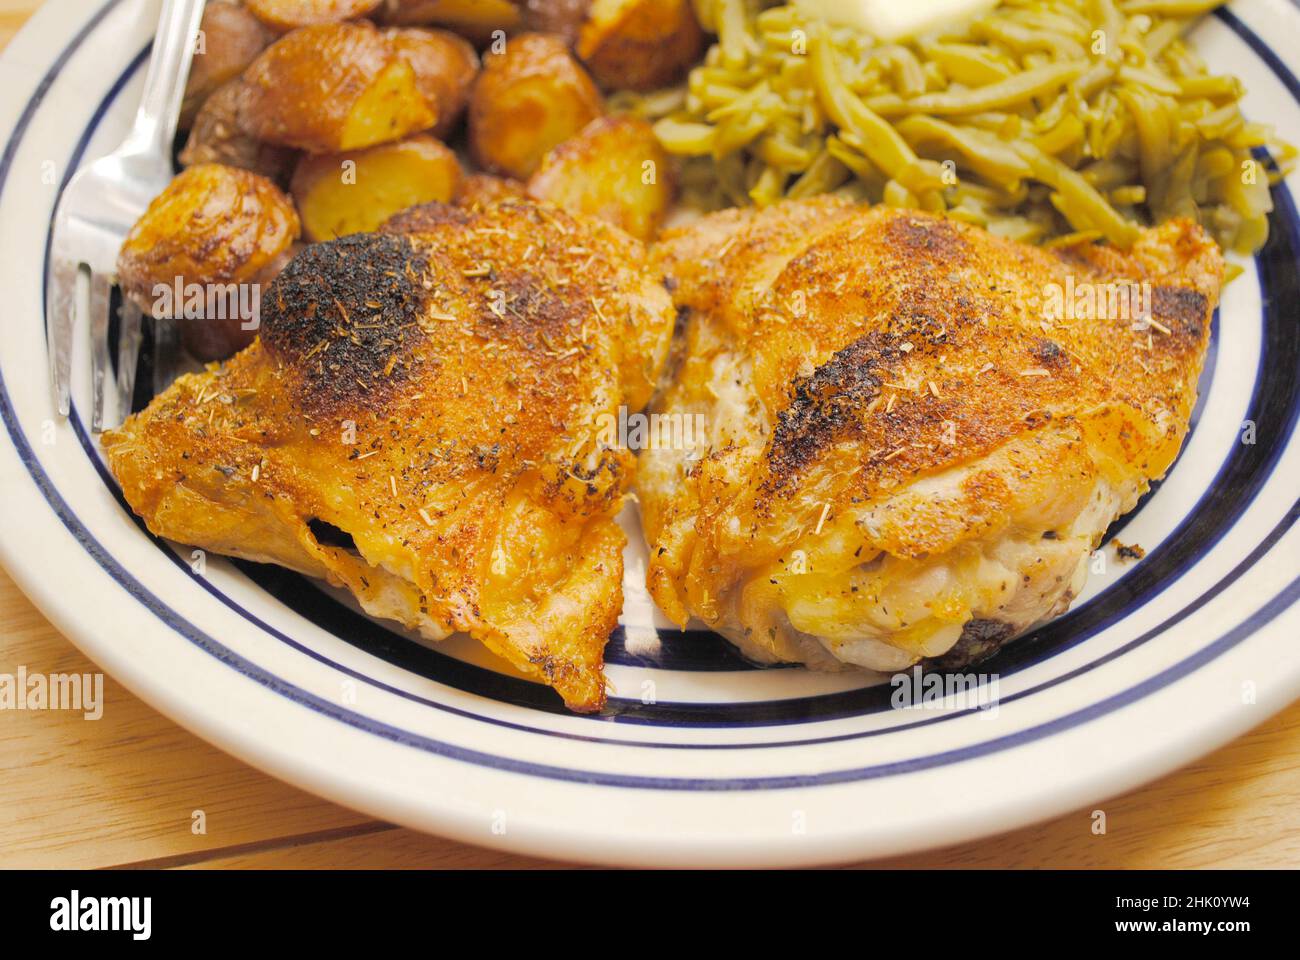 Fried Chicken as a Side Dish Stock Photo